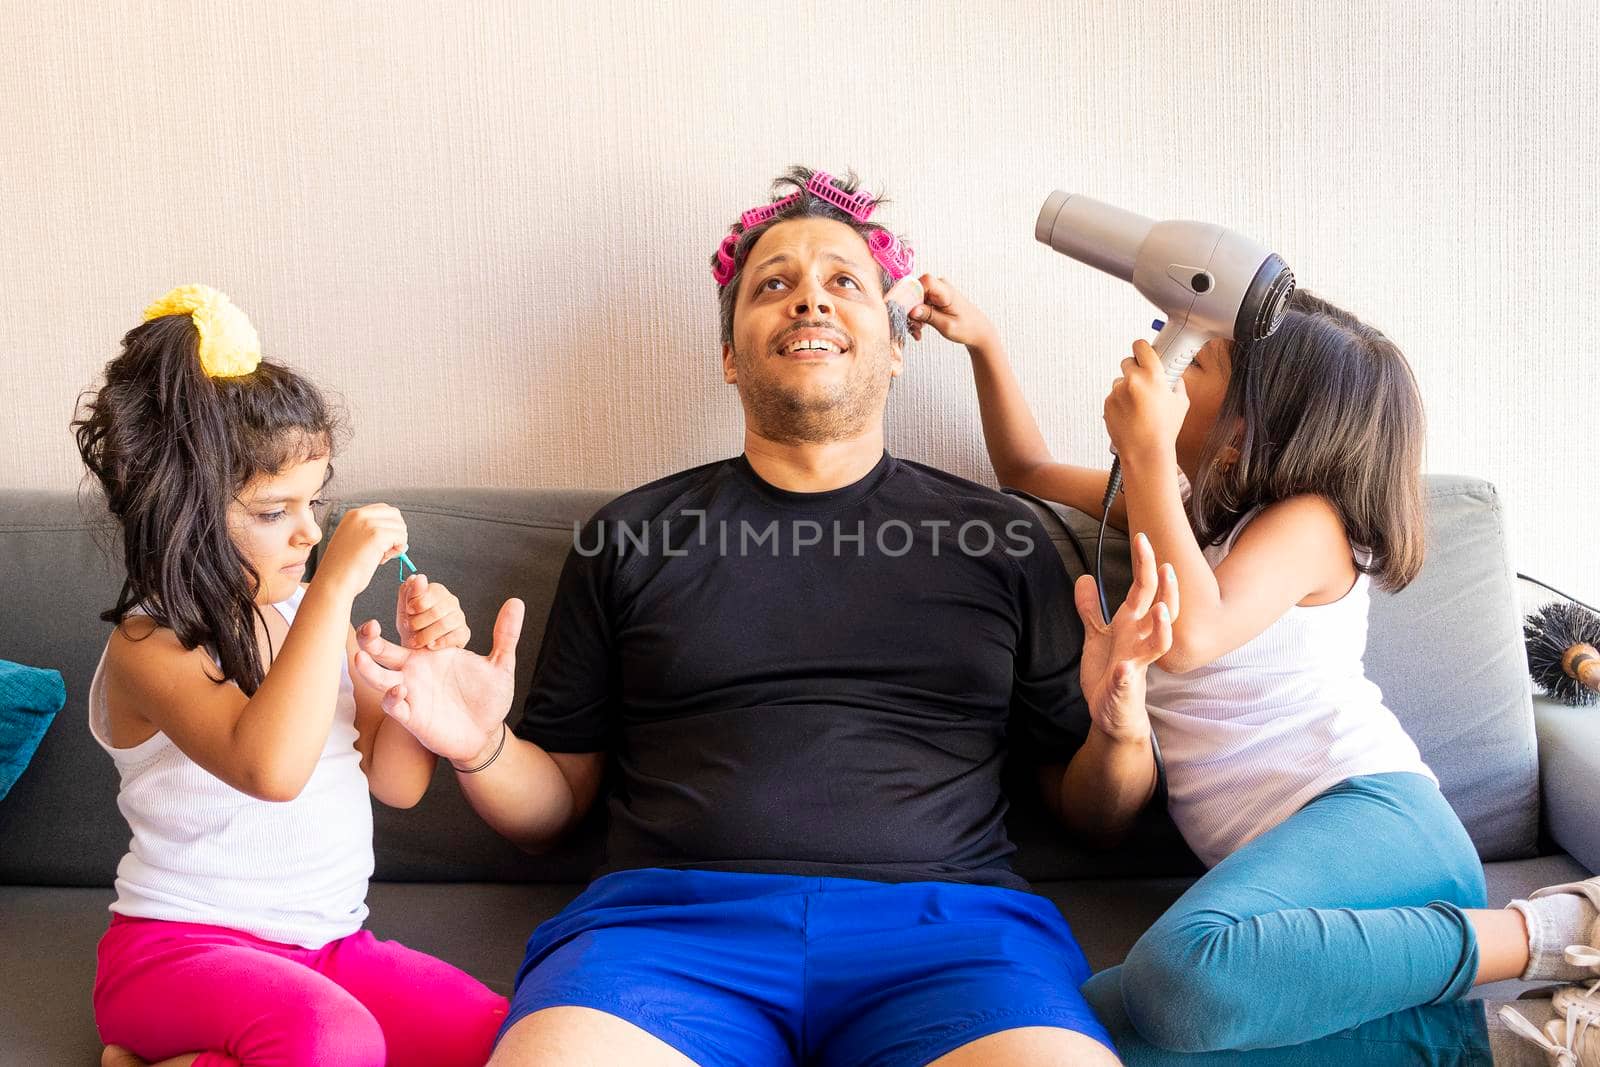 Pretty daughters are painting the nails and combing the hair of their handsome young father